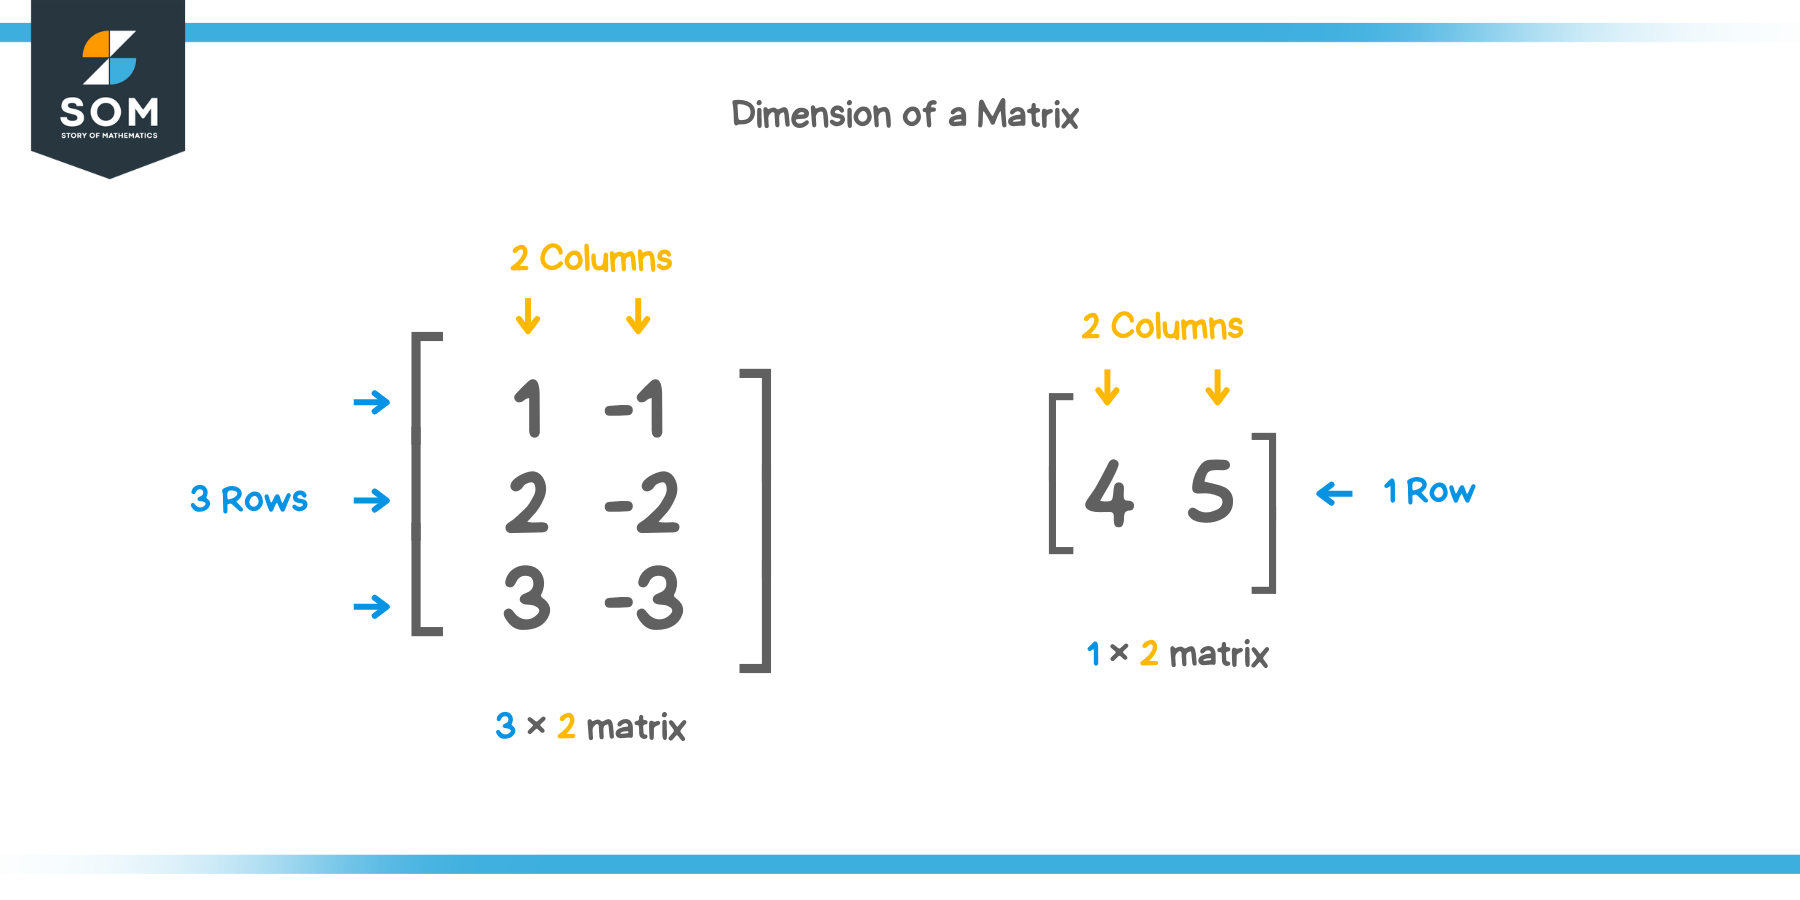 How to find the dimension of a matrix?